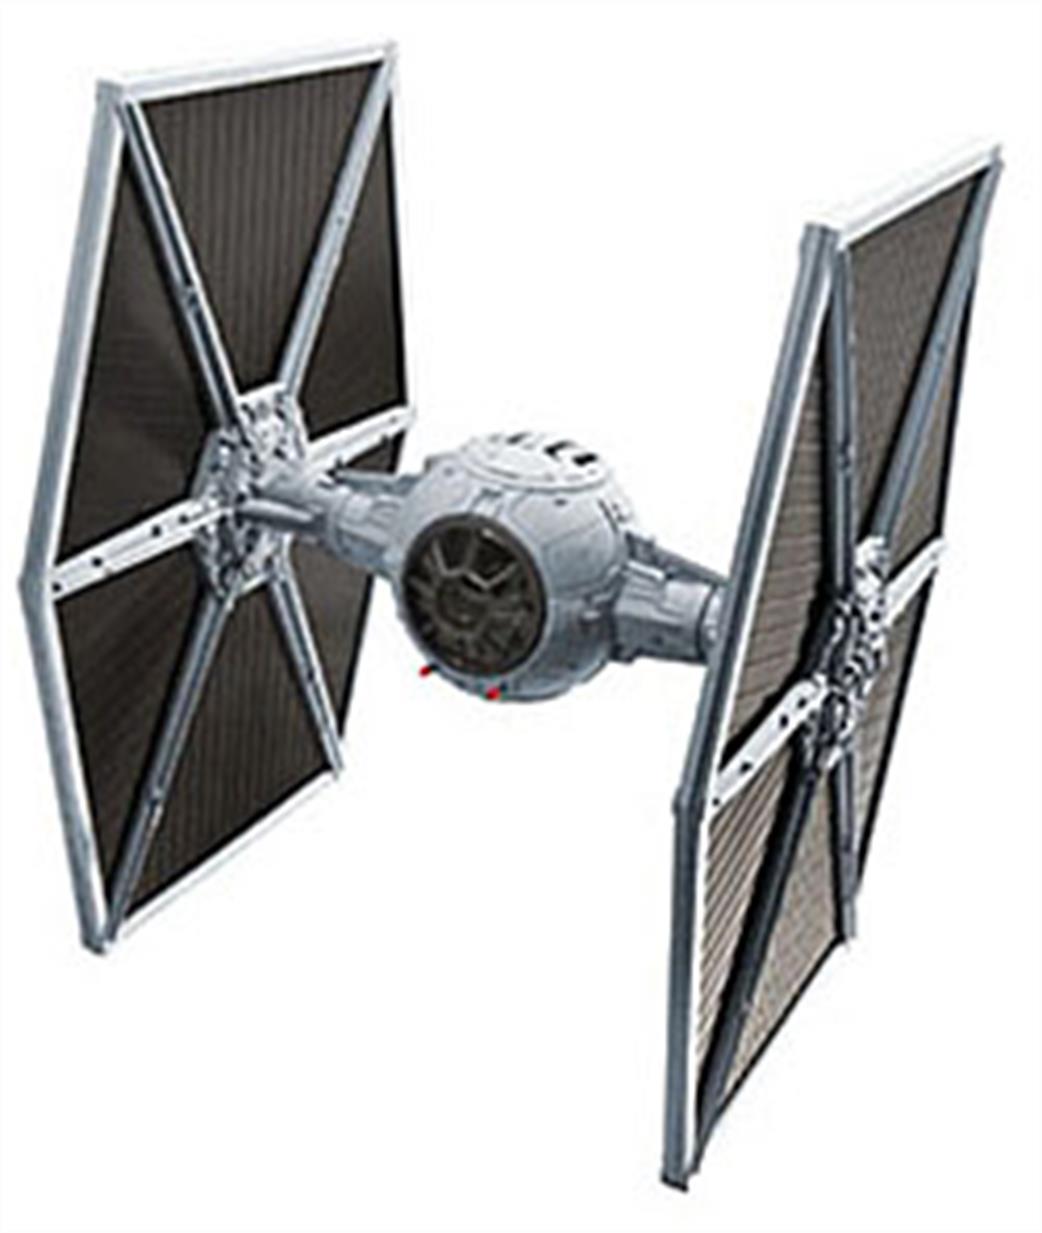 Revell 1/110 03605 Tie Fighter from Star Wars